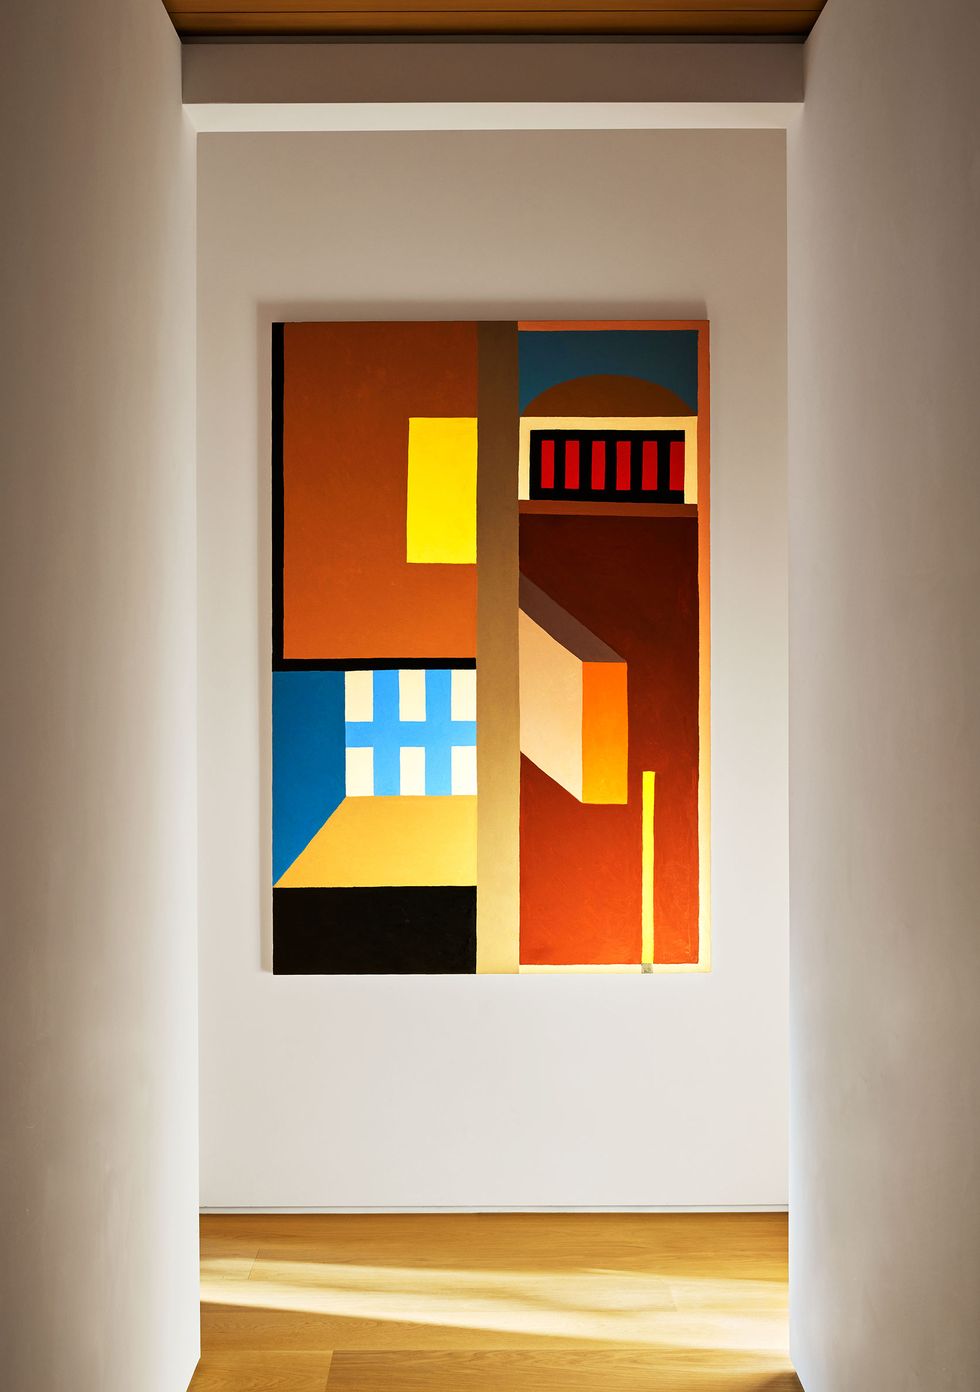 in a hallway with white walls and a wood floor hangs a painting with squares and rectangles in terracotta, blue, yellow, black, orange, and yellow